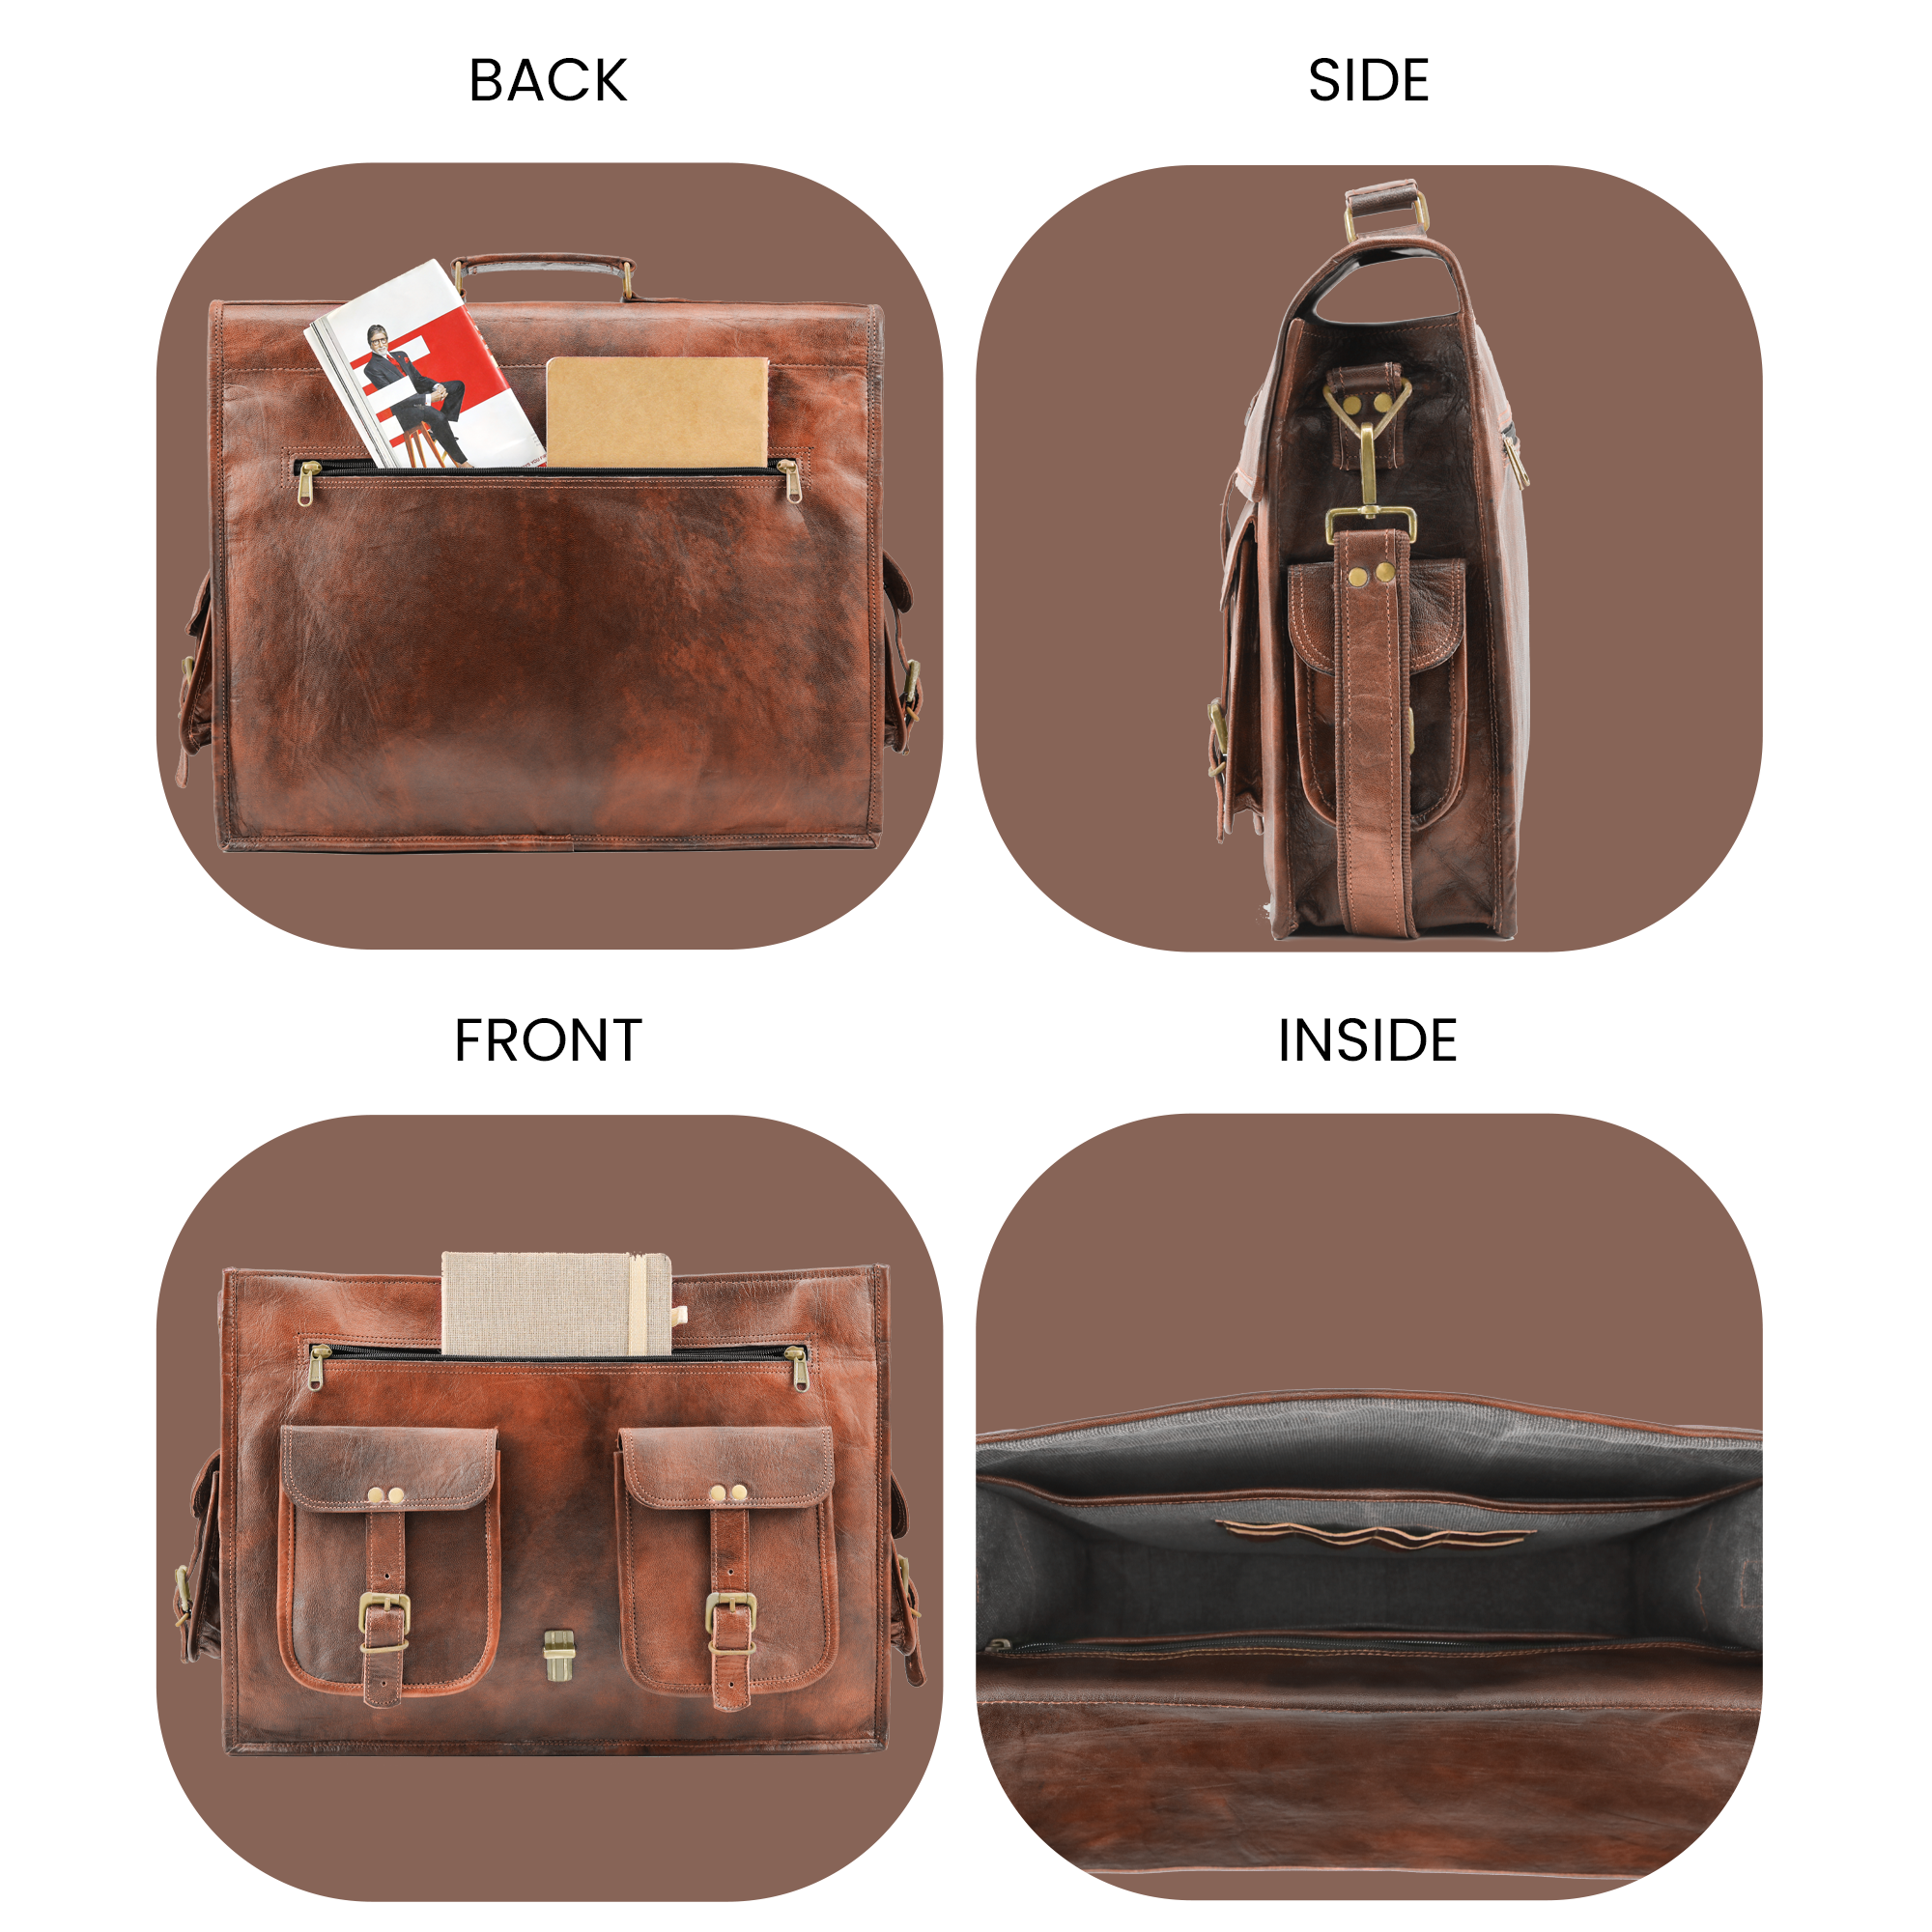 Back, Side, Front, Inside Images of the leather Satchel Bag It Shows different zipper pockets and laptop sleeve